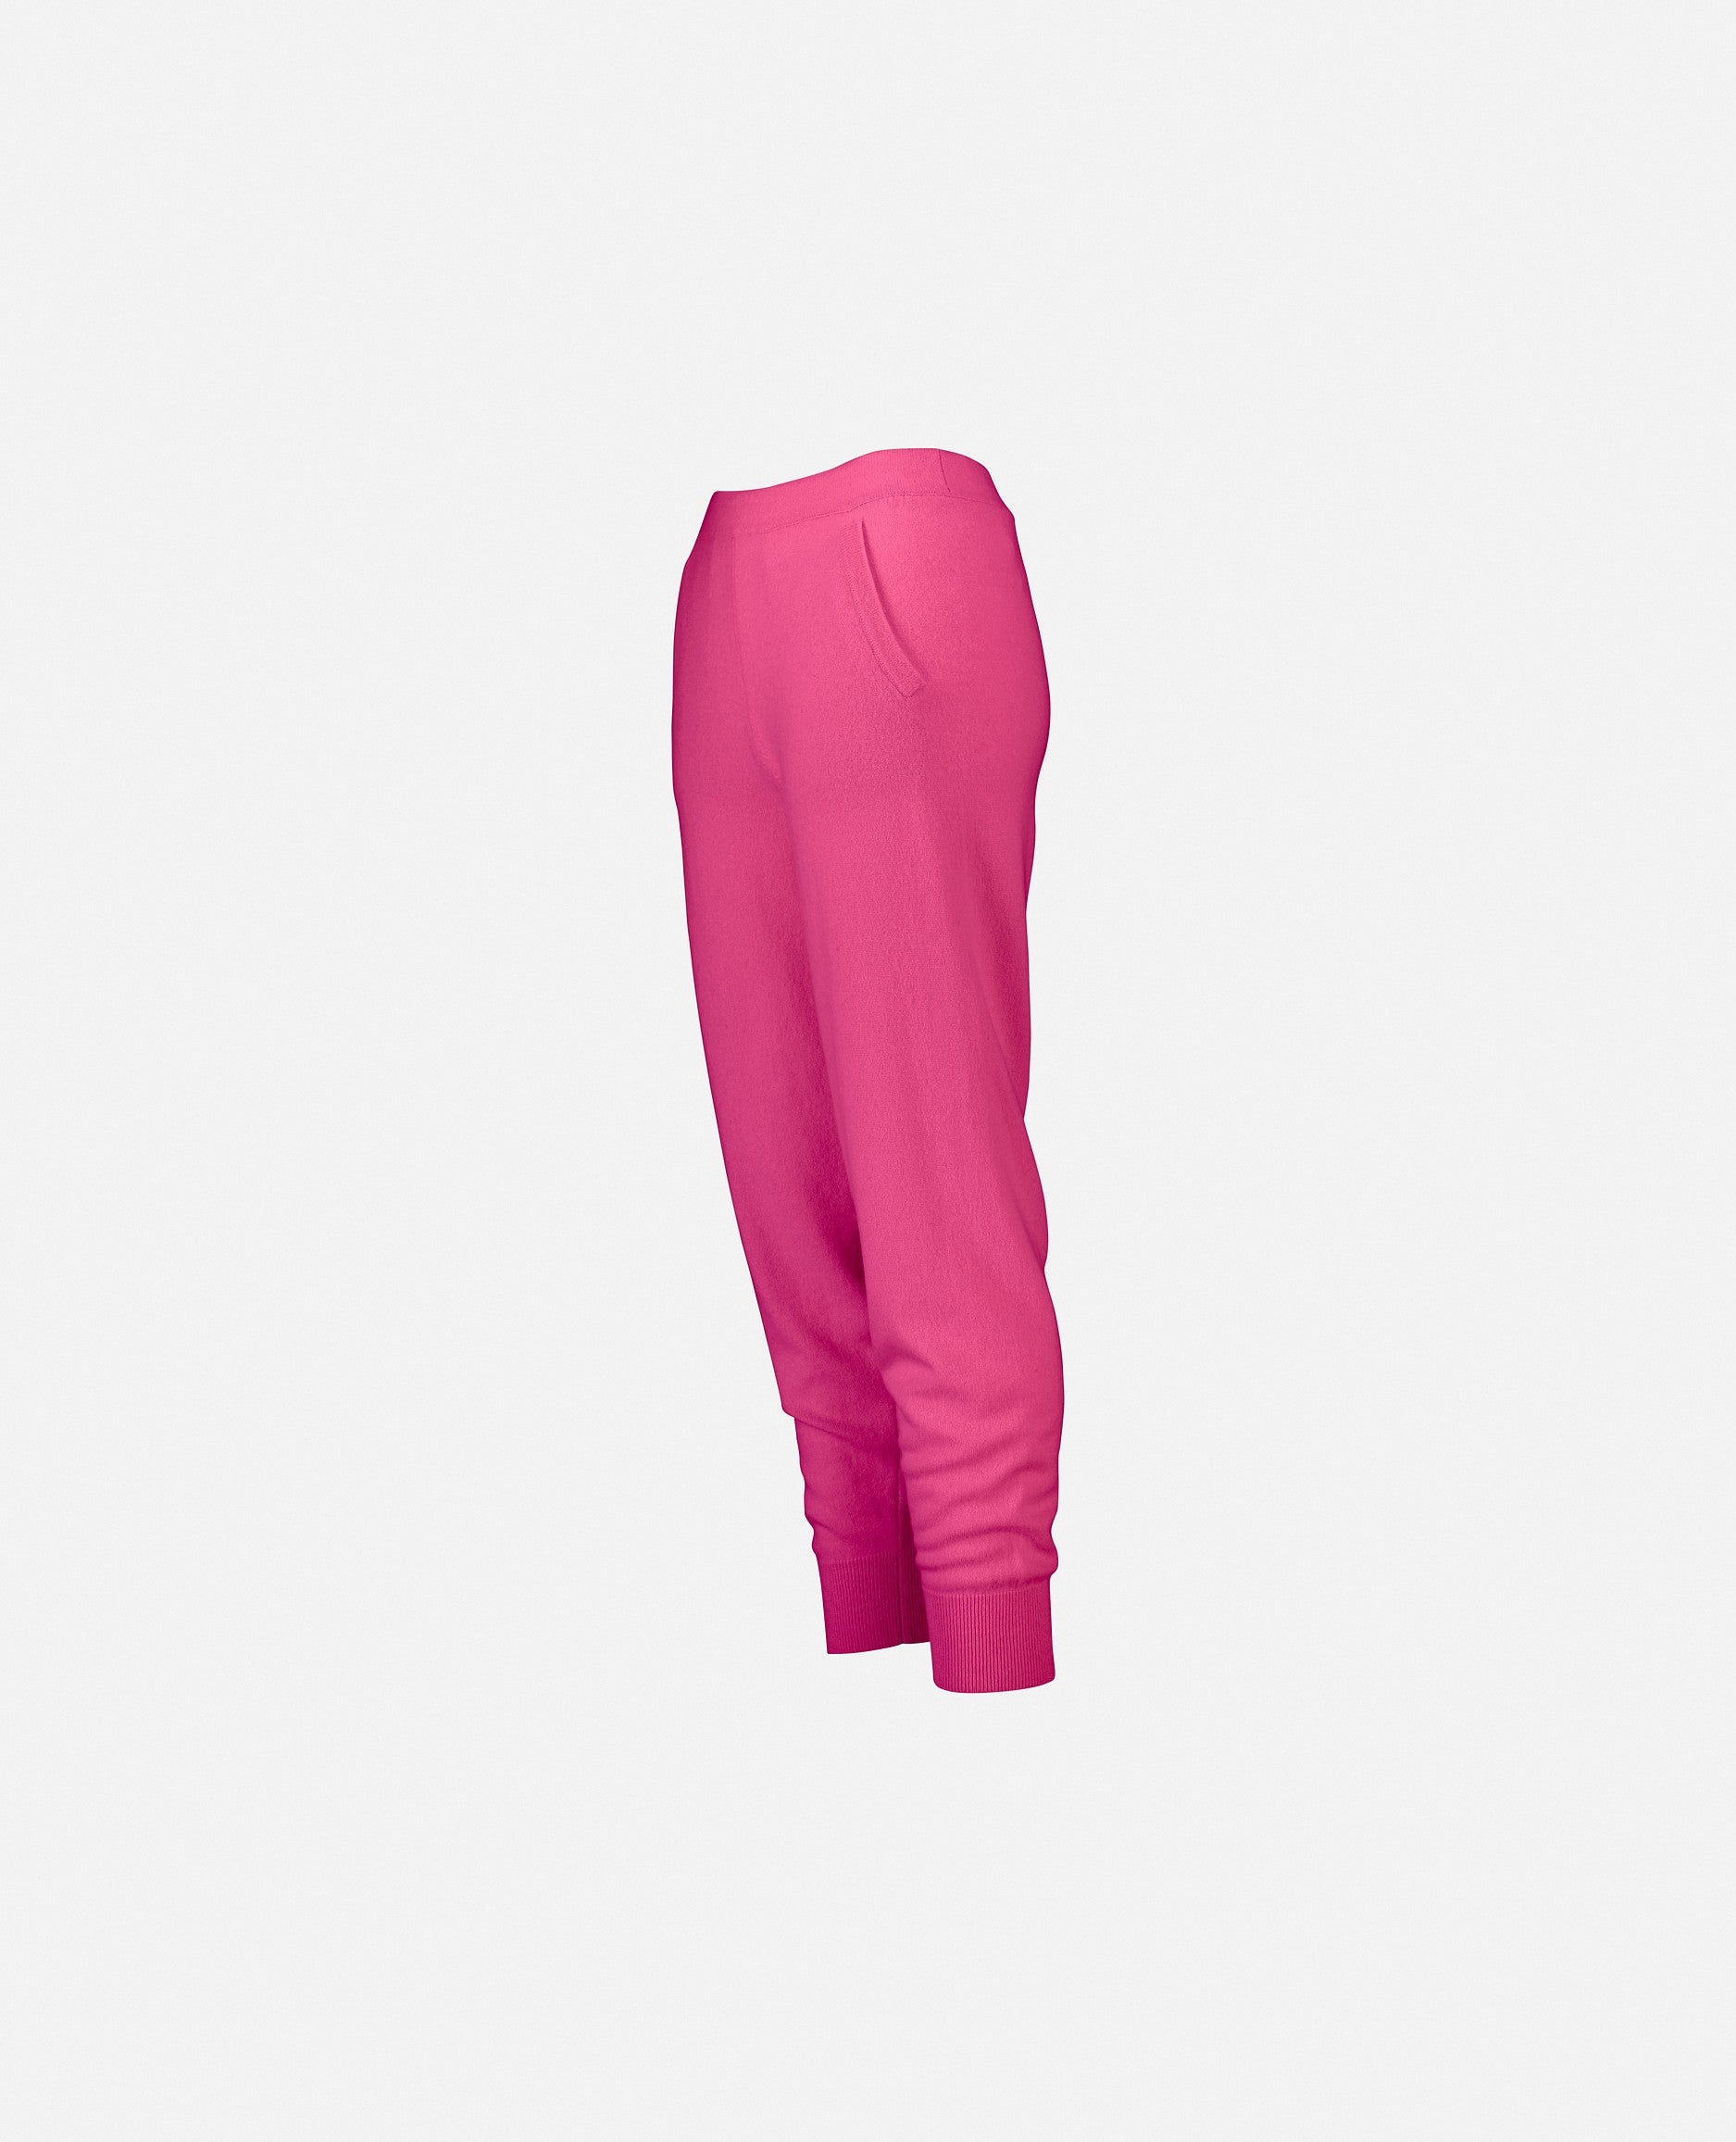 Cashmere pants in rose - classic fit